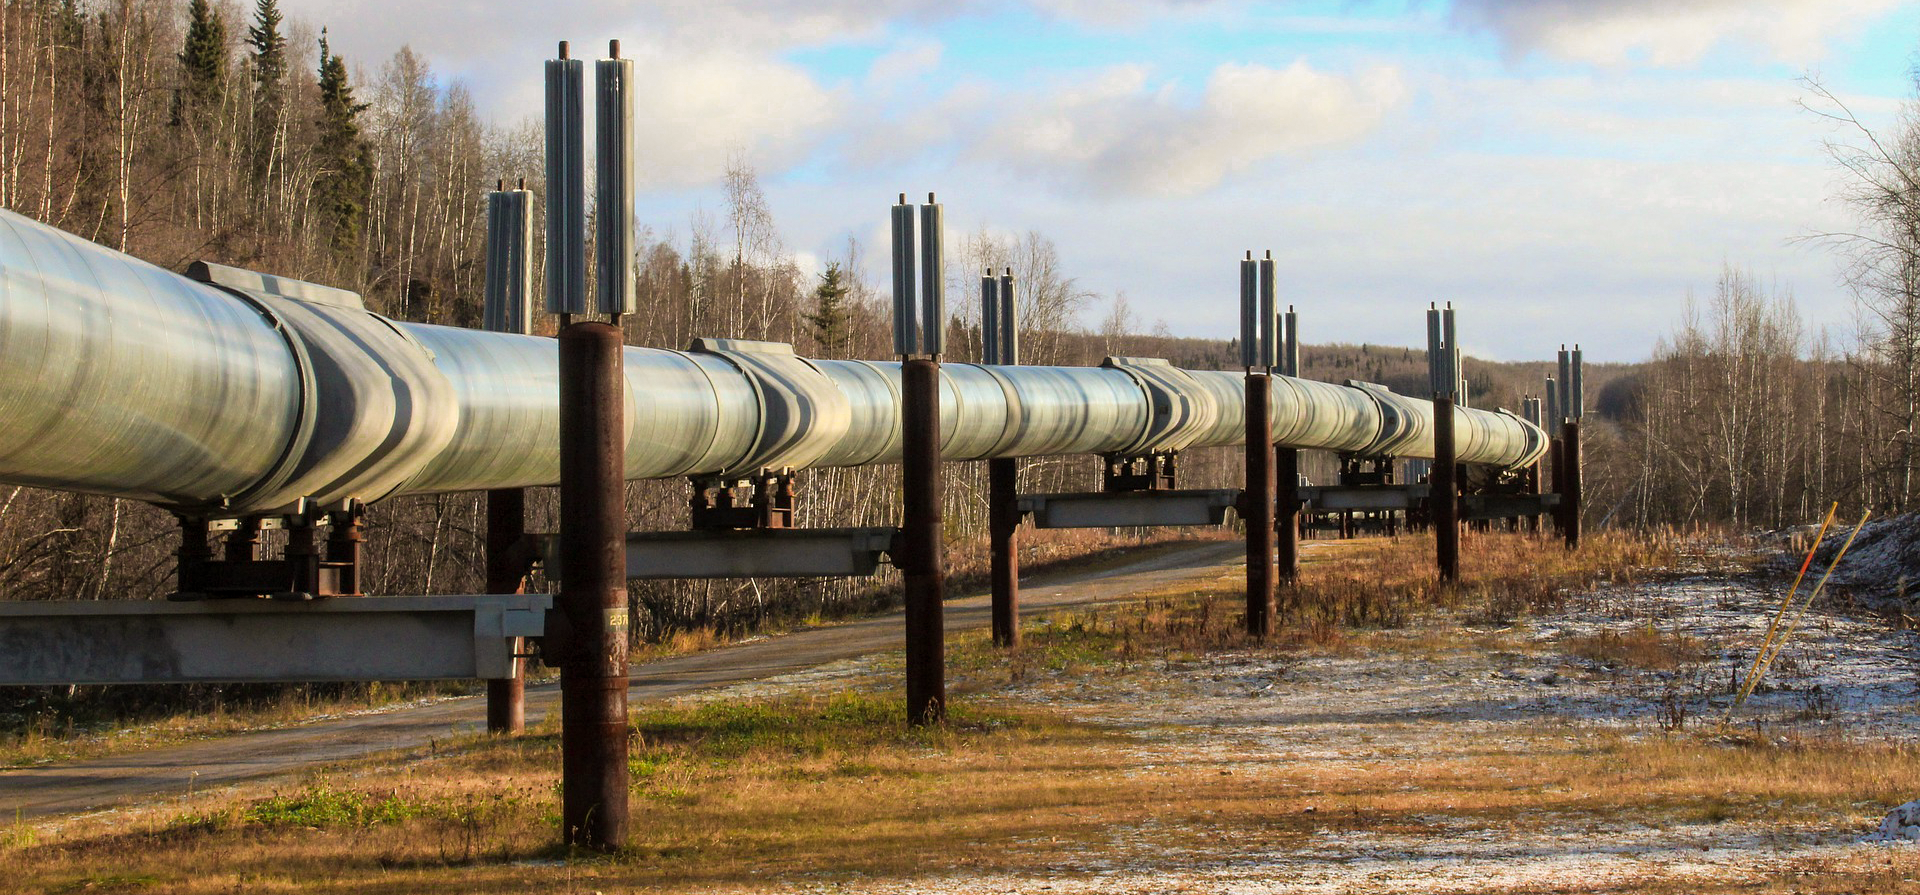 A pipeline across a cleared field, with light snow, with forest behind